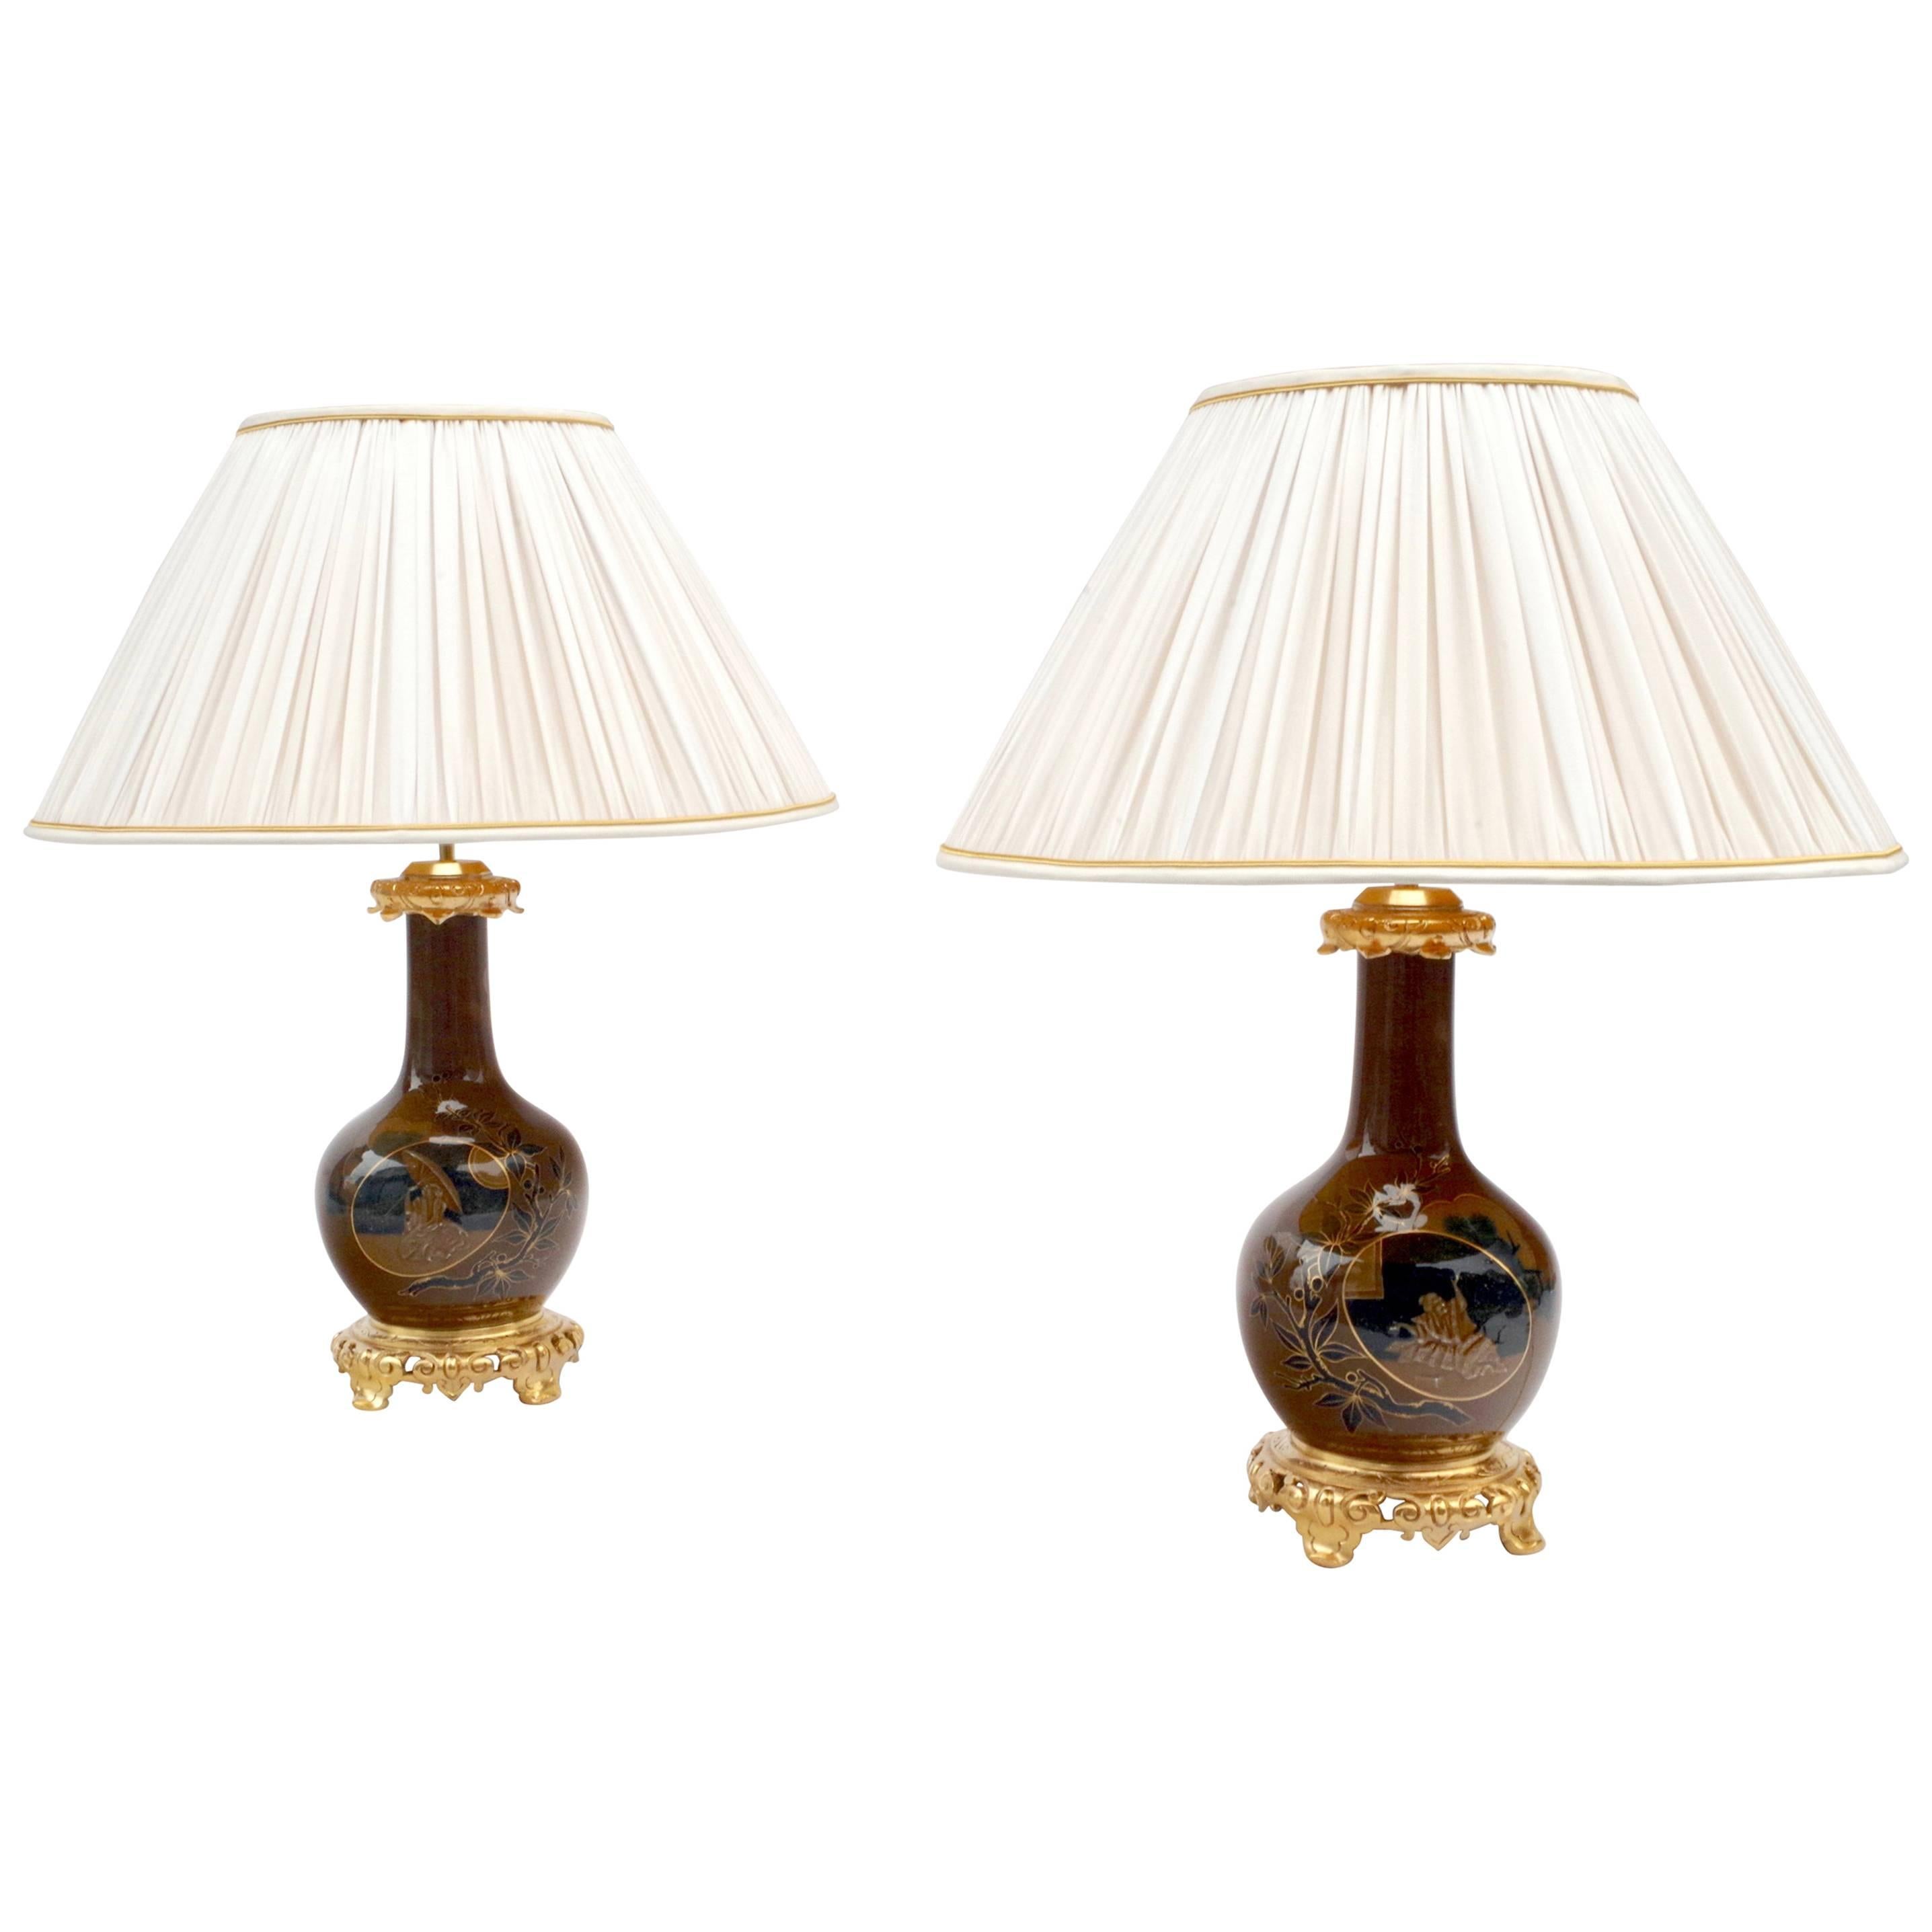 Pair of Brown and Blue Porcelain Lamps, Japanese Style, Late 19th Century